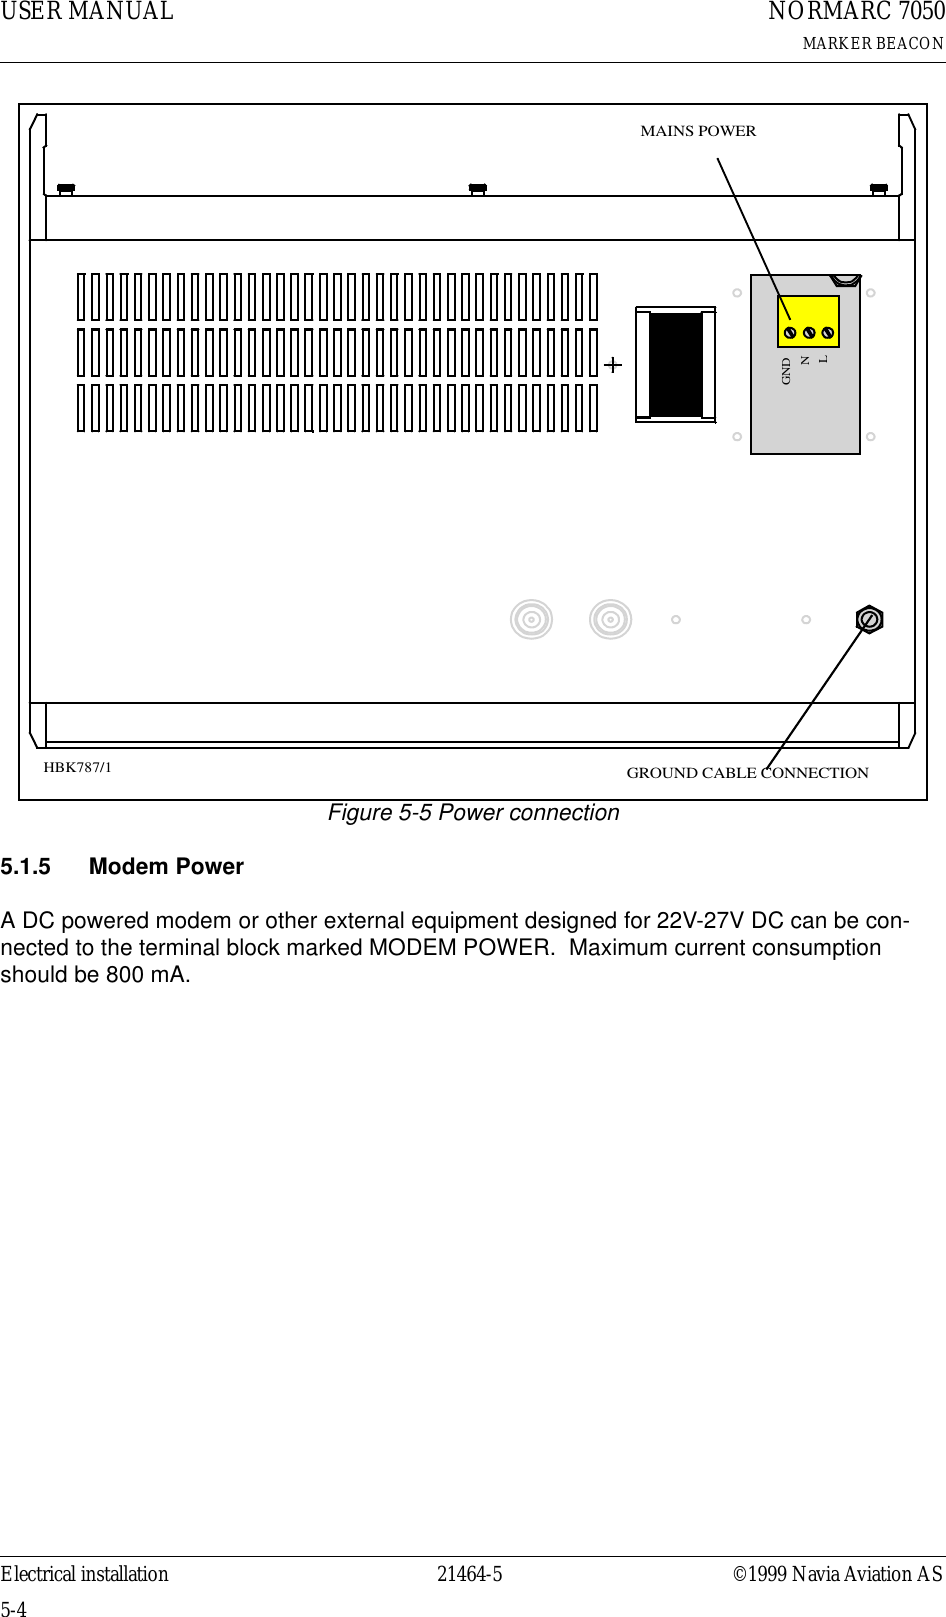 USER MANUAL5-421464-5NORMARC 7050MARKER BEACONElectrical installation ©1999 Navia Aviation AS Figure 5-5 Power connection5.1.5 Modem PowerA DC powered modem or other external equipment designed for 22V-27V DC can be con-nected to the terminal block marked MODEM POWER.  Maximum current consumption should be 800 mA.MAINS POWERGNDLNGROUND CABLE CONNECTIONHBK787/1